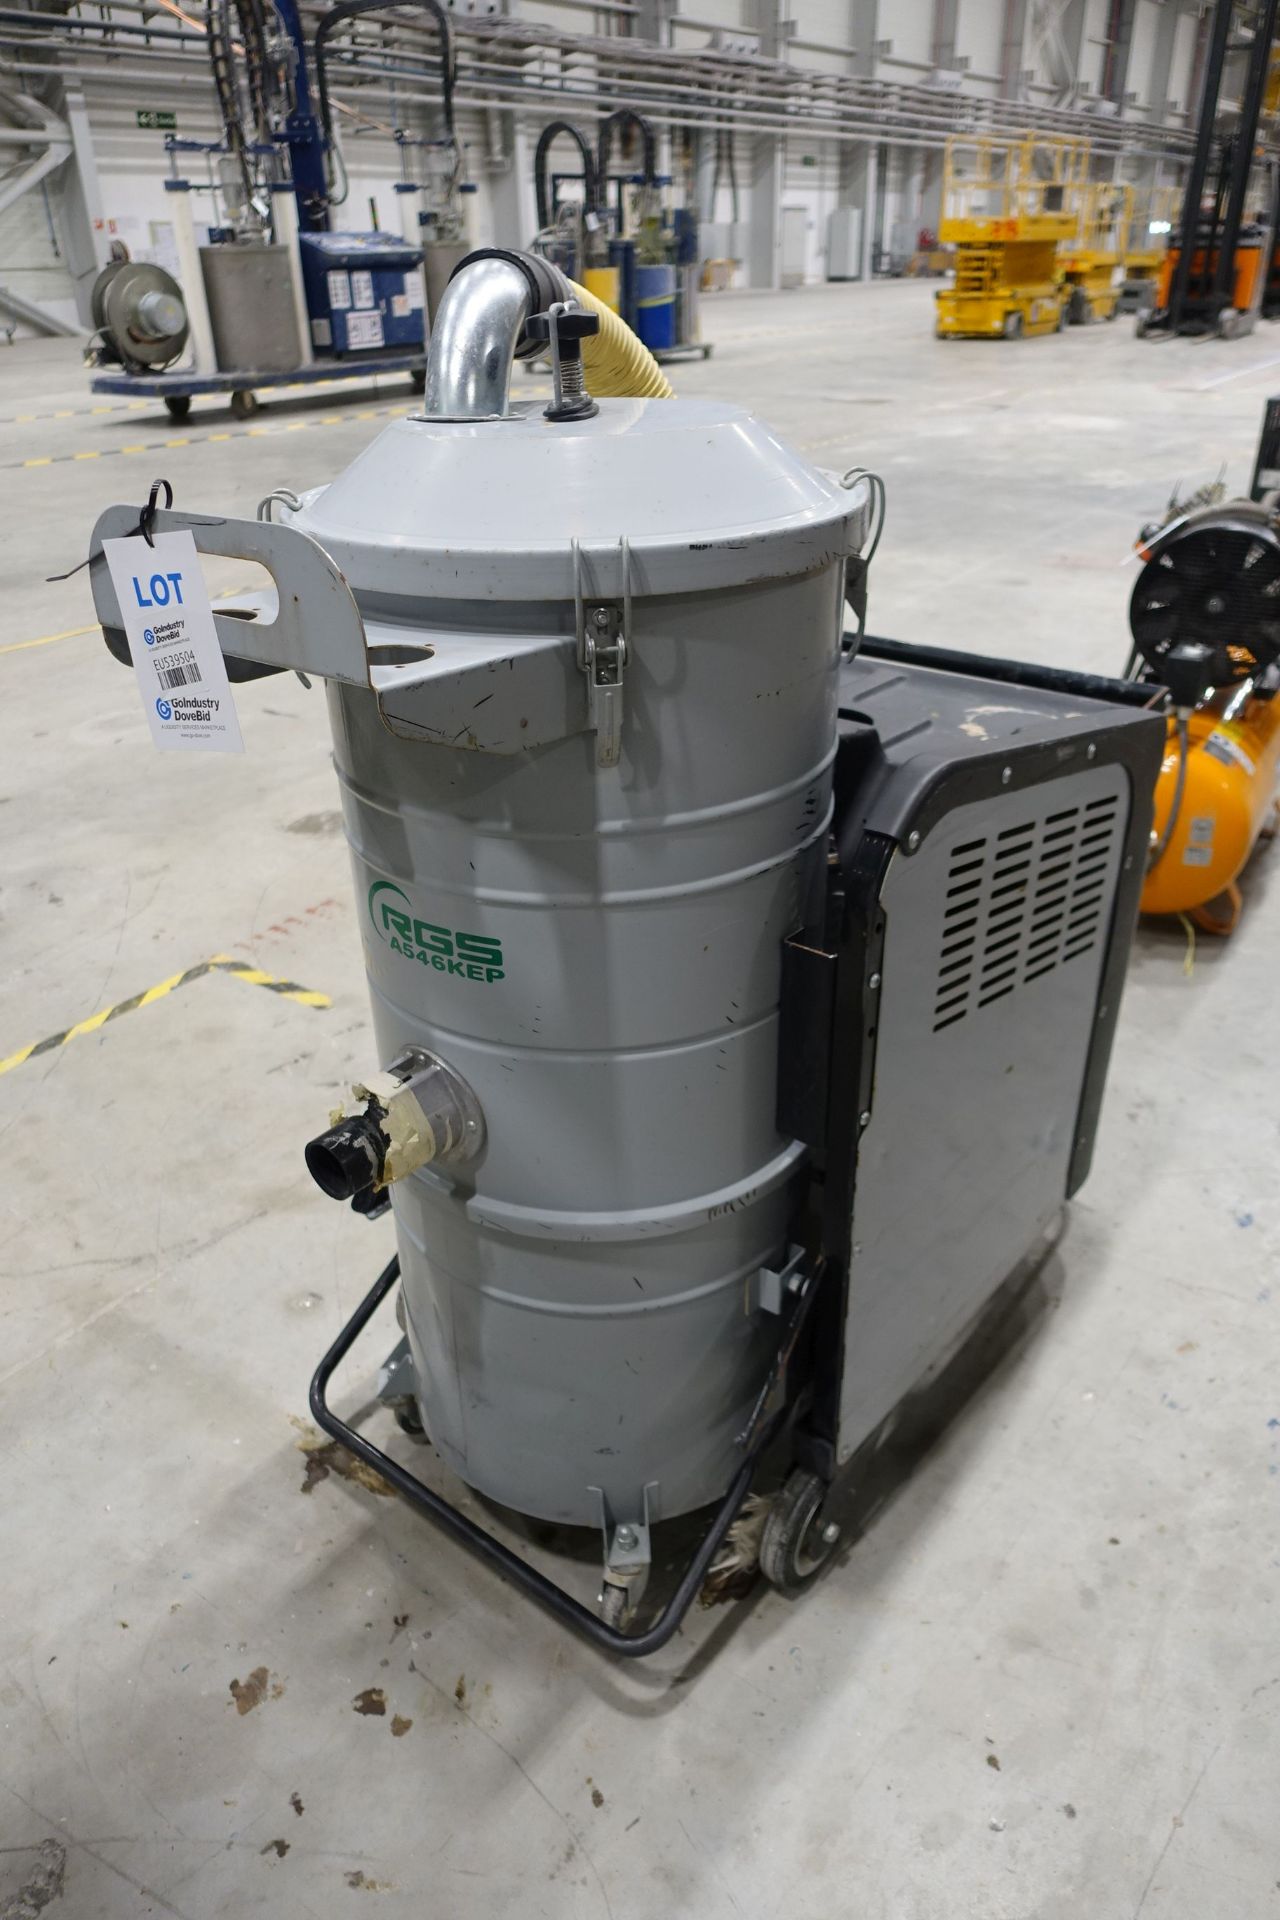 DELFIN RGS A546 KEP Industrial Vaccum Cleaner (2016), Ser # 161246 - Image 3 of 13